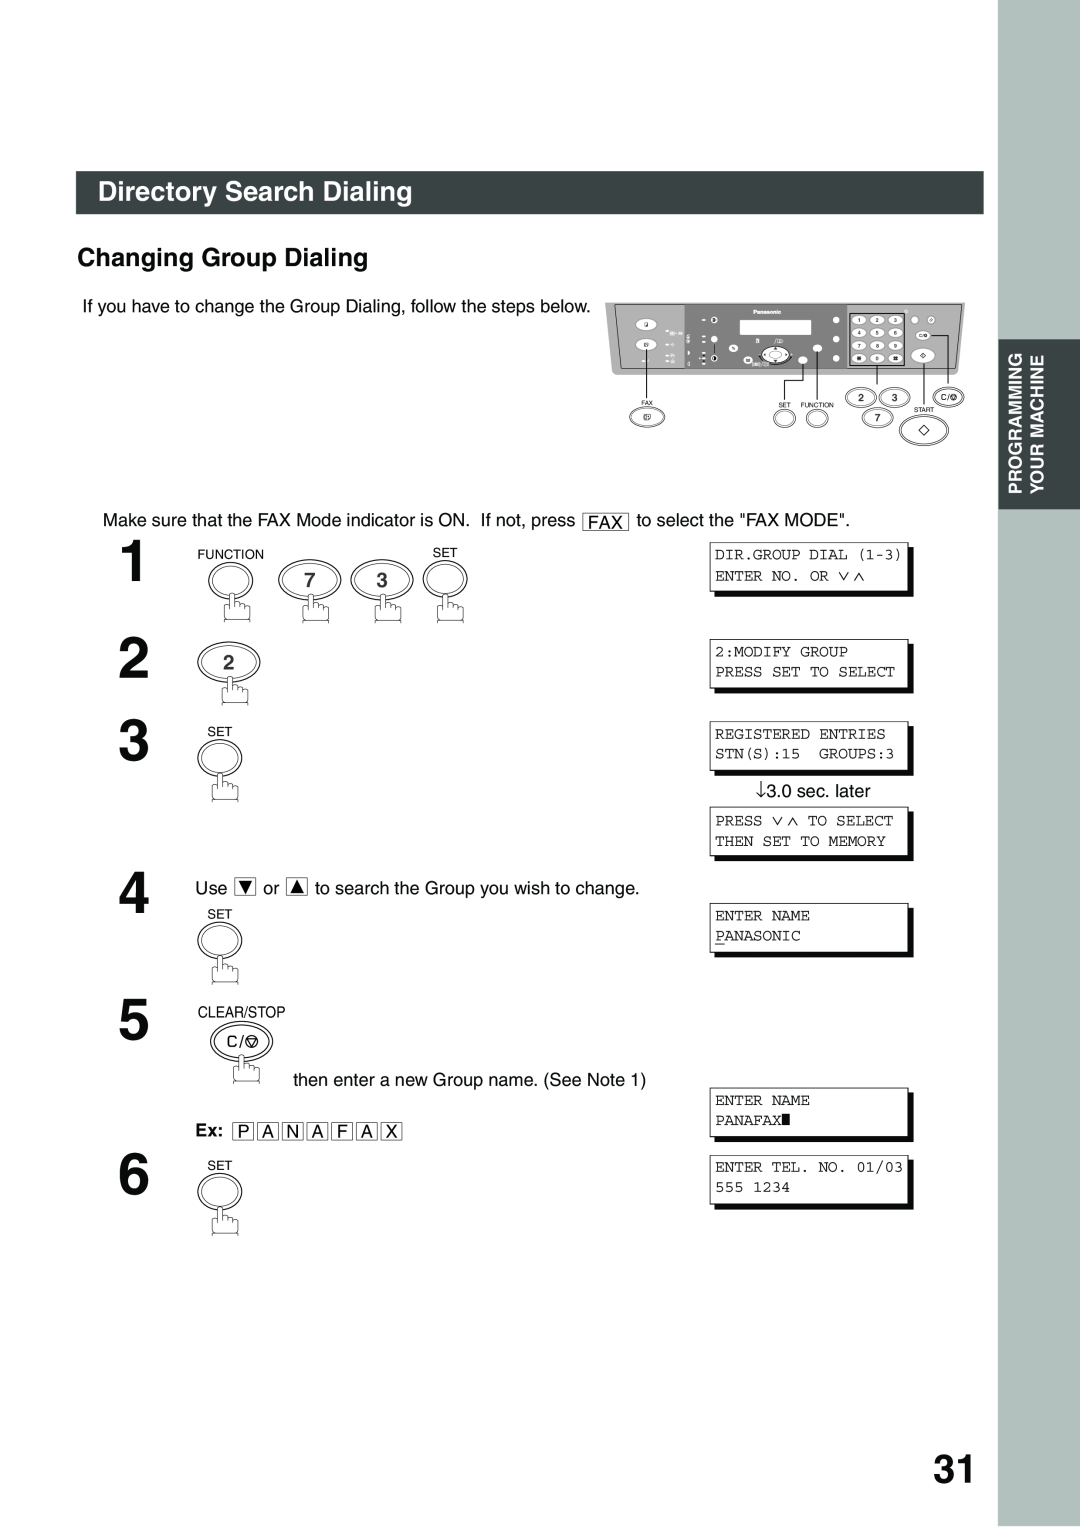 Panasonic DP-135FP appendix Changing Group Dialing, Directory Search Dialing, Dir.Group Dial 